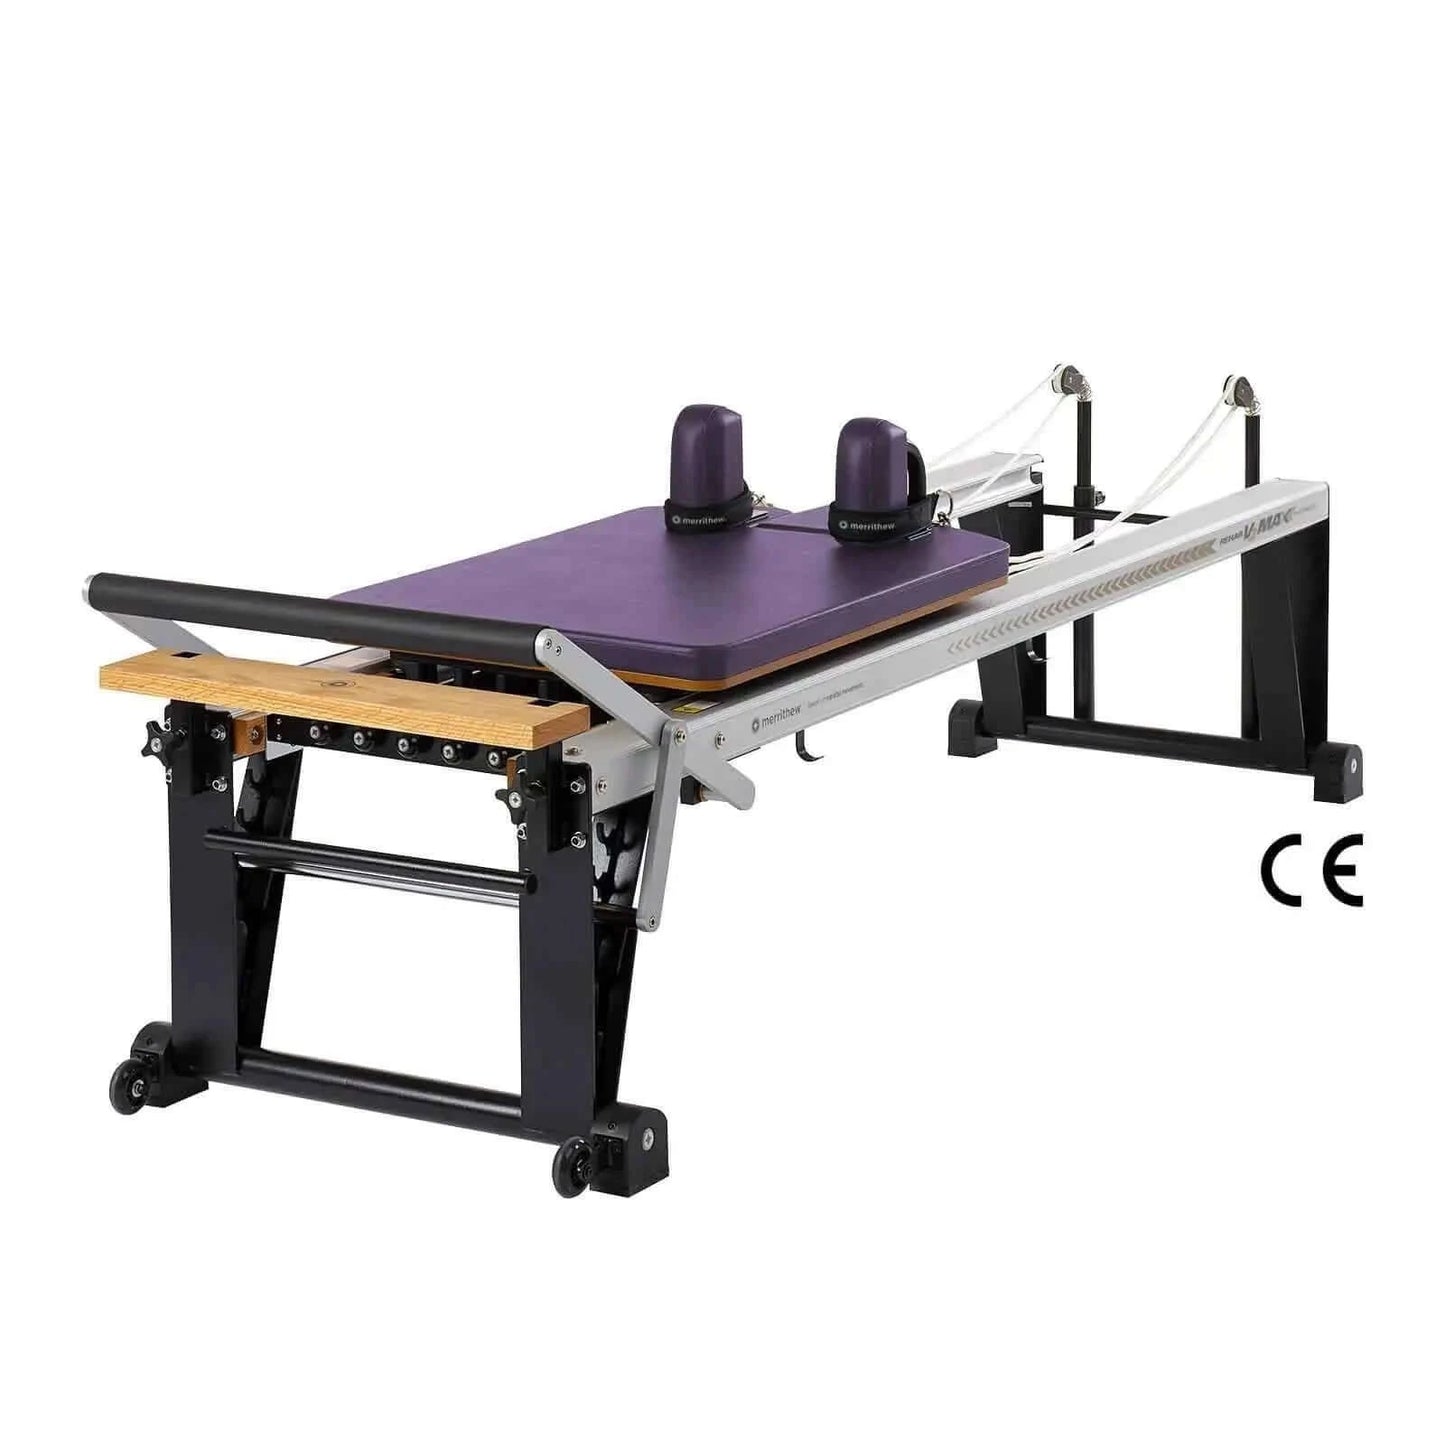 Purple Impulse Merrithew™ Pilates Reformer Extension Upgrade · Rehab V2 Max™ by Merrithew™ sold by Pilates Matters® by BSP LLC